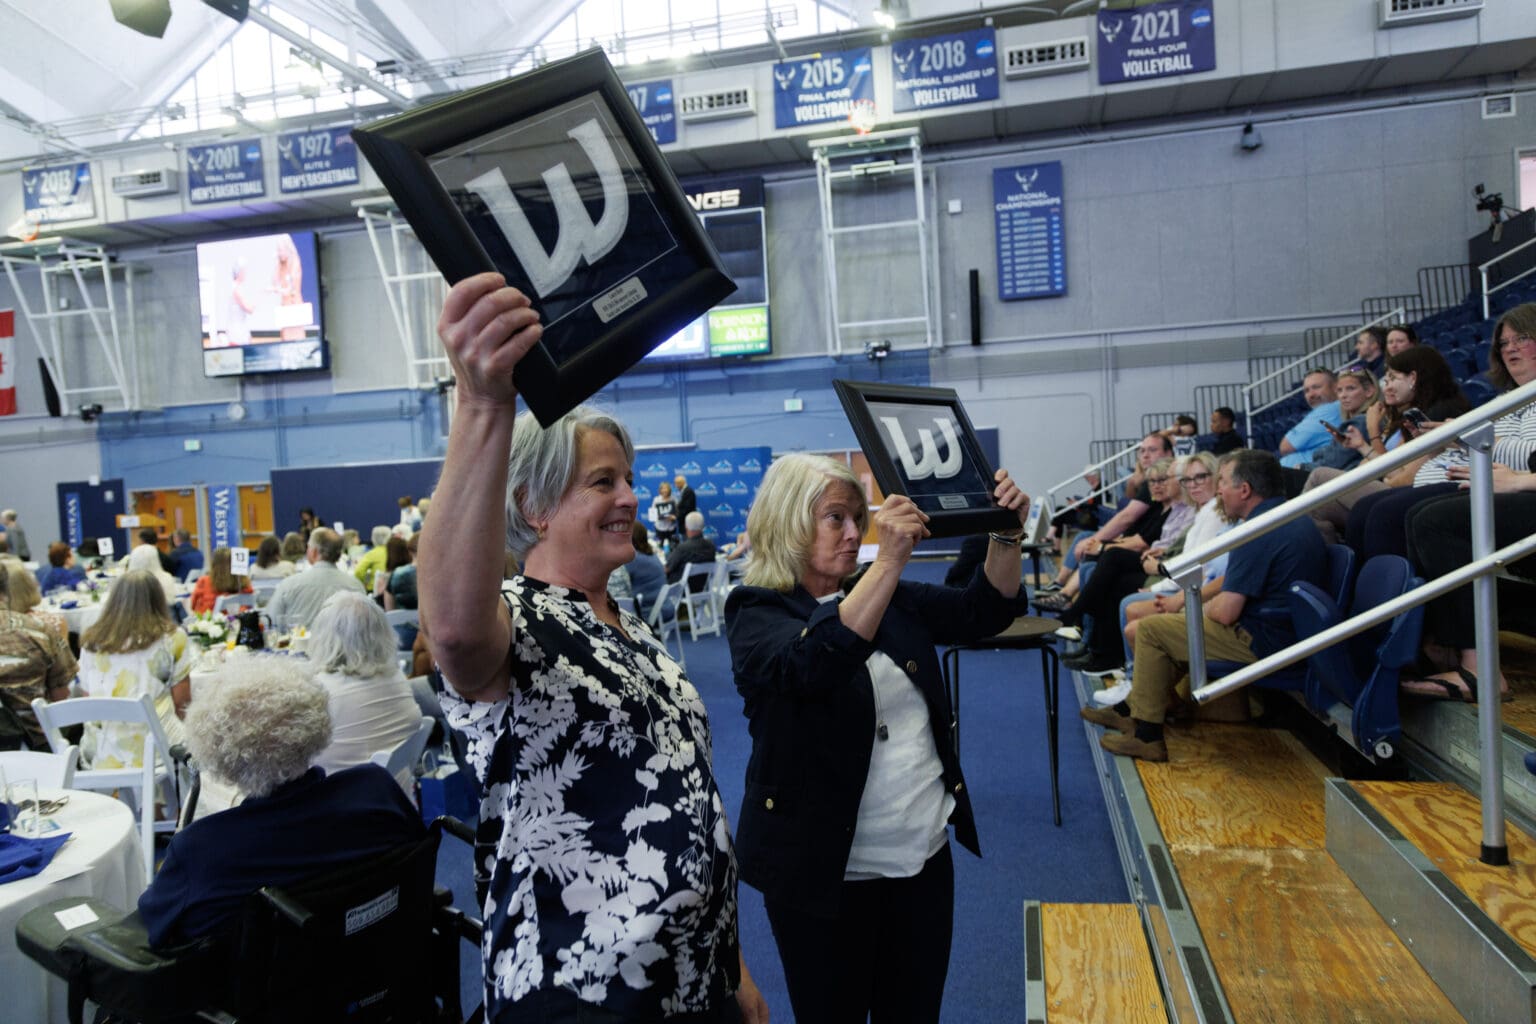 Laura Healy and Joane Larson Ischer stop for a photo and hold up their varsity letters from the school during an awards ceremony at Carver Gymnasium on May 20